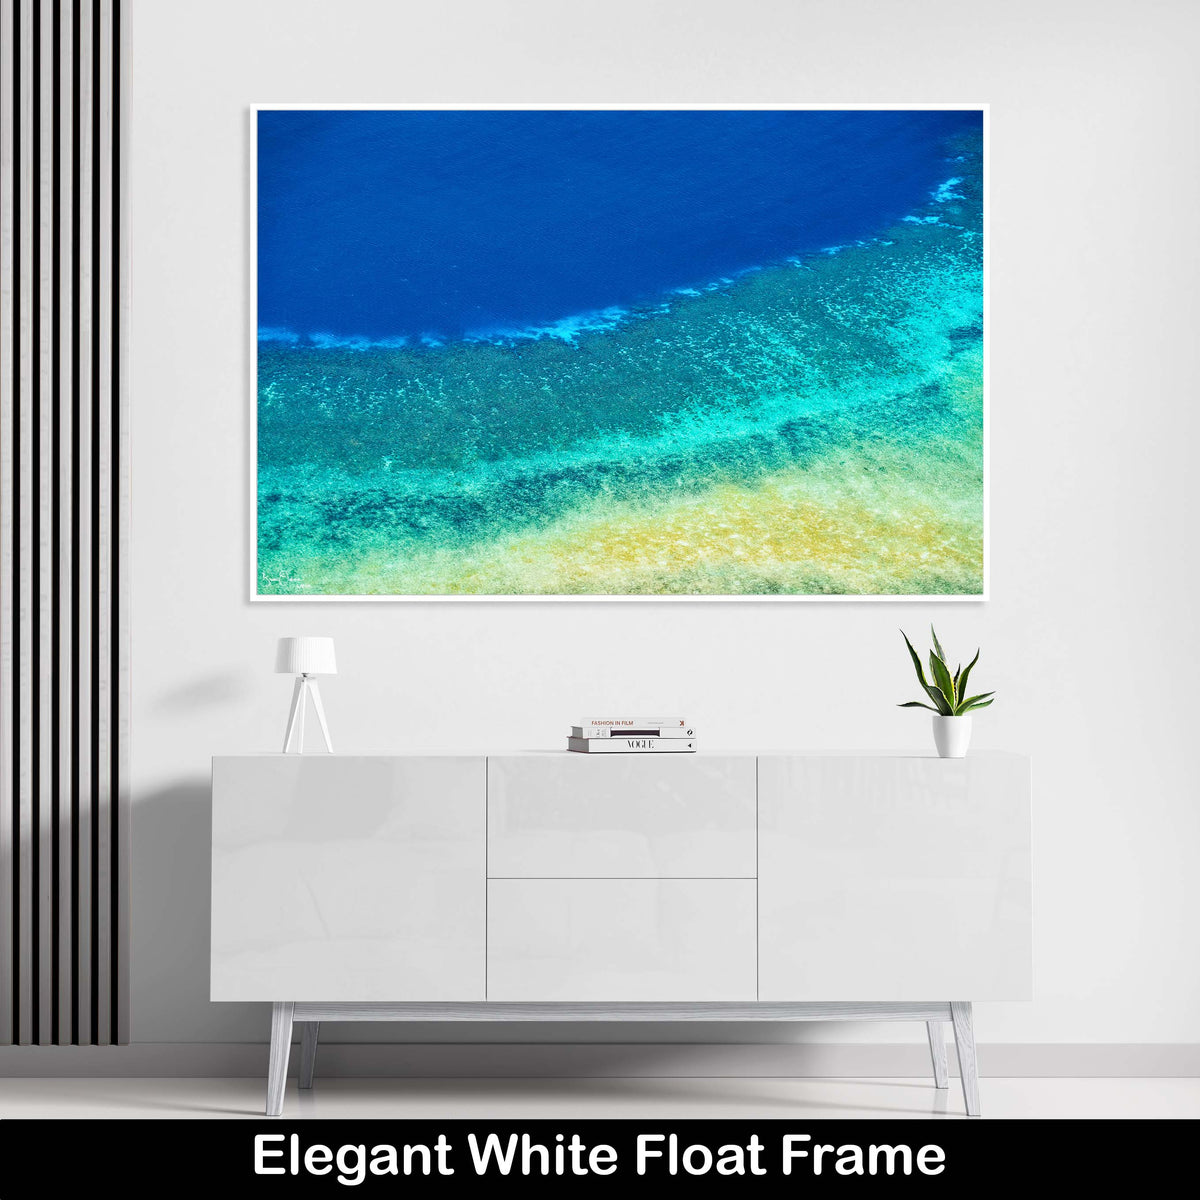 Abstract Luxury Float Frame Wall Art Print Colorful Pattern Blue Yellow Turquoise